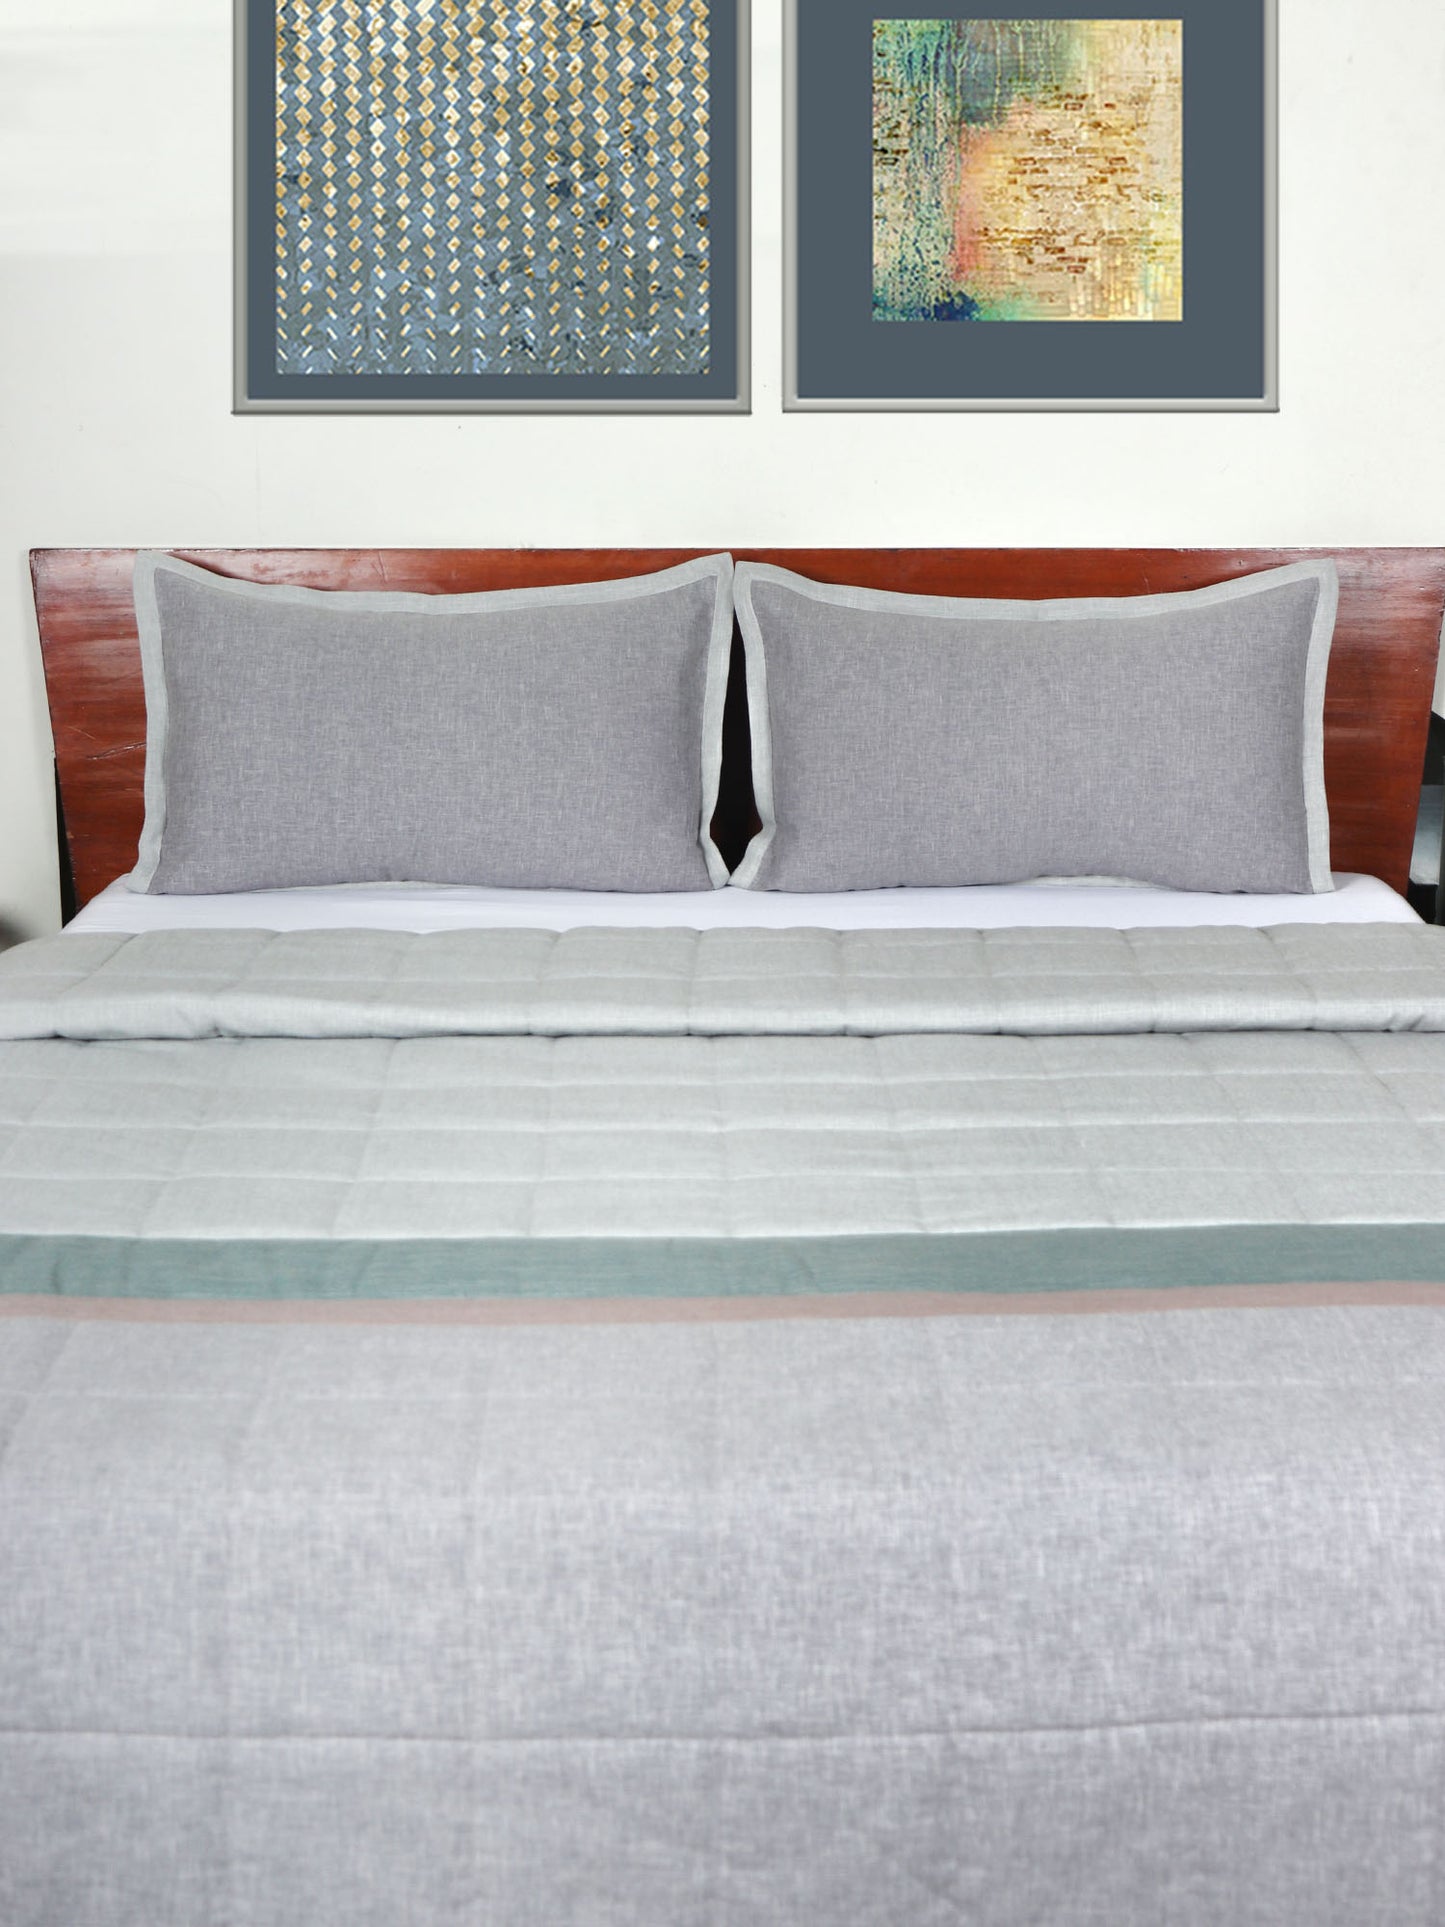 gray blue colored bed quilt / comforter with 2 matching pillow covers made from polyester front and cotton backed quilt / comforter for king size double bed 